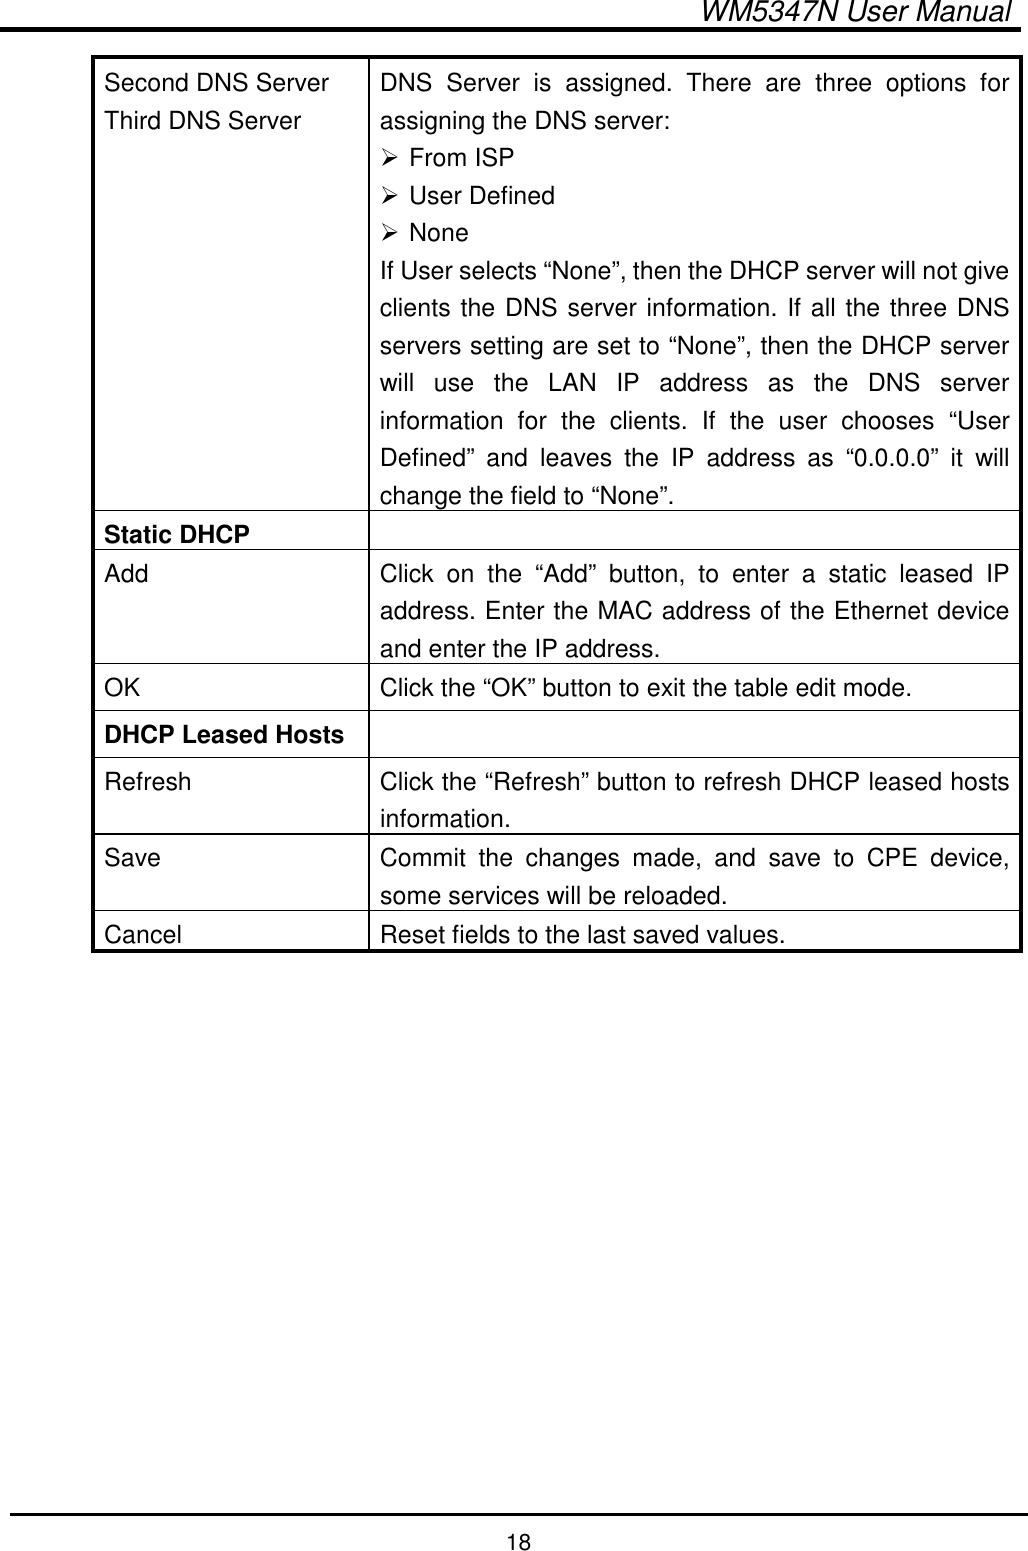  WM5347N User Manual  18 Second DNS Server Third DNS Server DNS  Server  is  assigned.  There  are  three  options  for assigning the DNS server:  From ISP  User Defined  None If User selects “None”, then the DHCP server will not give clients the DNS server information. If all the three DNS servers setting are set to “None”, then the DHCP server will  use  the  LAN  IP  address  as  the  DNS  server information  for  the  clients.  If  the  user  chooses  “User Defined”  and  leaves  the  IP  address  as  “0.0.0.0”  it  will change the field to “None”. Static DHCP   Add  Click  on  the  “Add”  button,  to  enter  a  static  leased  IP address. Enter the MAC address of the Ethernet device and enter the IP address. OK  Click the “OK” button to exit the table edit mode. DHCP Leased Hosts   Refresh  Click the “Refresh” button to refresh DHCP leased hosts information. Save  Commit  the  changes  made,  and  save  to  CPE  device, some services will be reloaded. Cancel  Reset fields to the last saved values.  